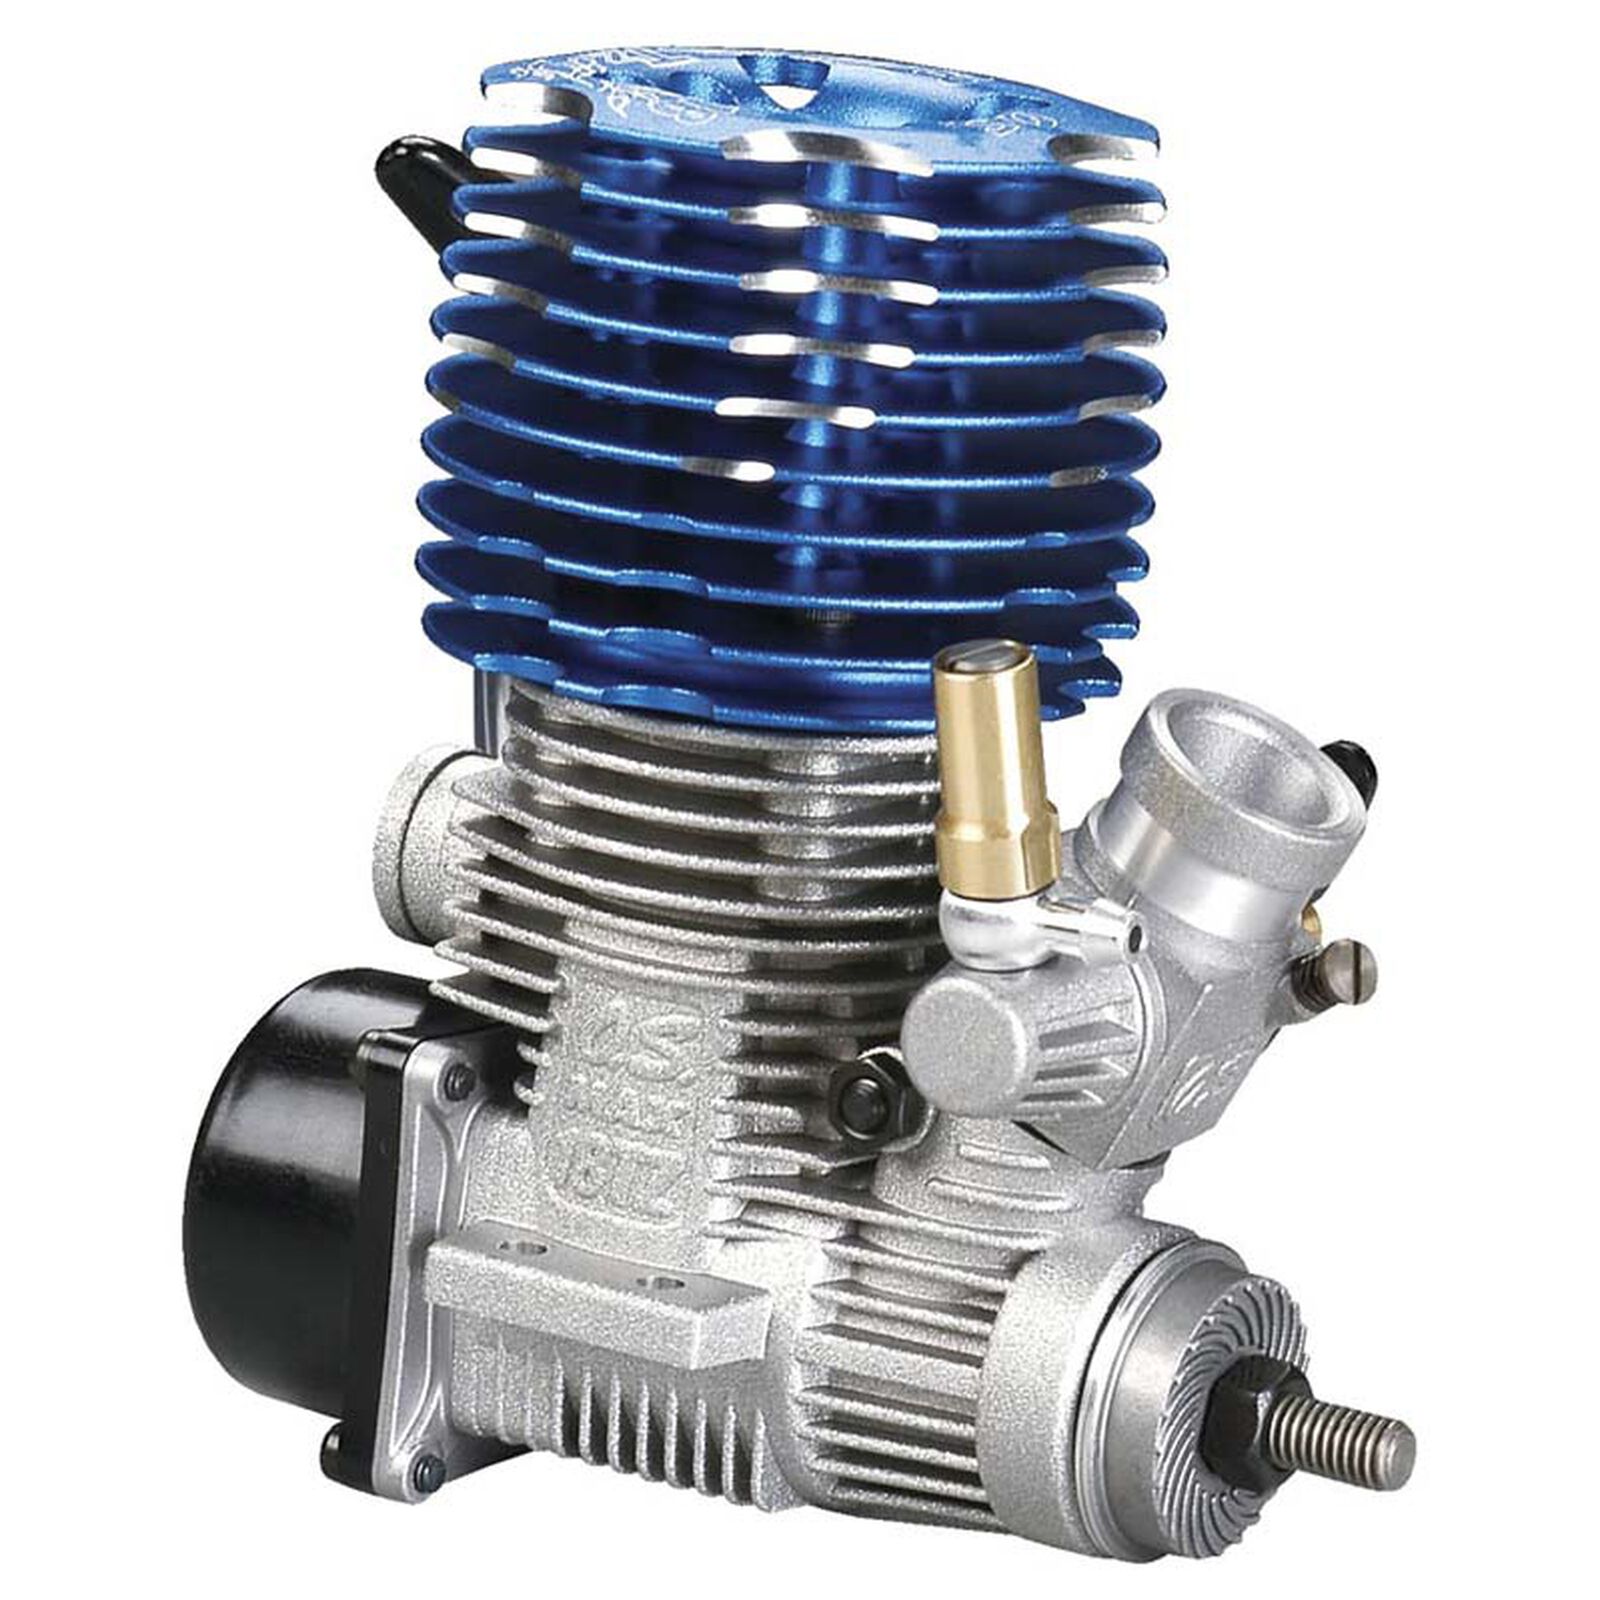 18TZ-TX ABC Turbo Engine with 11L Rotary Carb